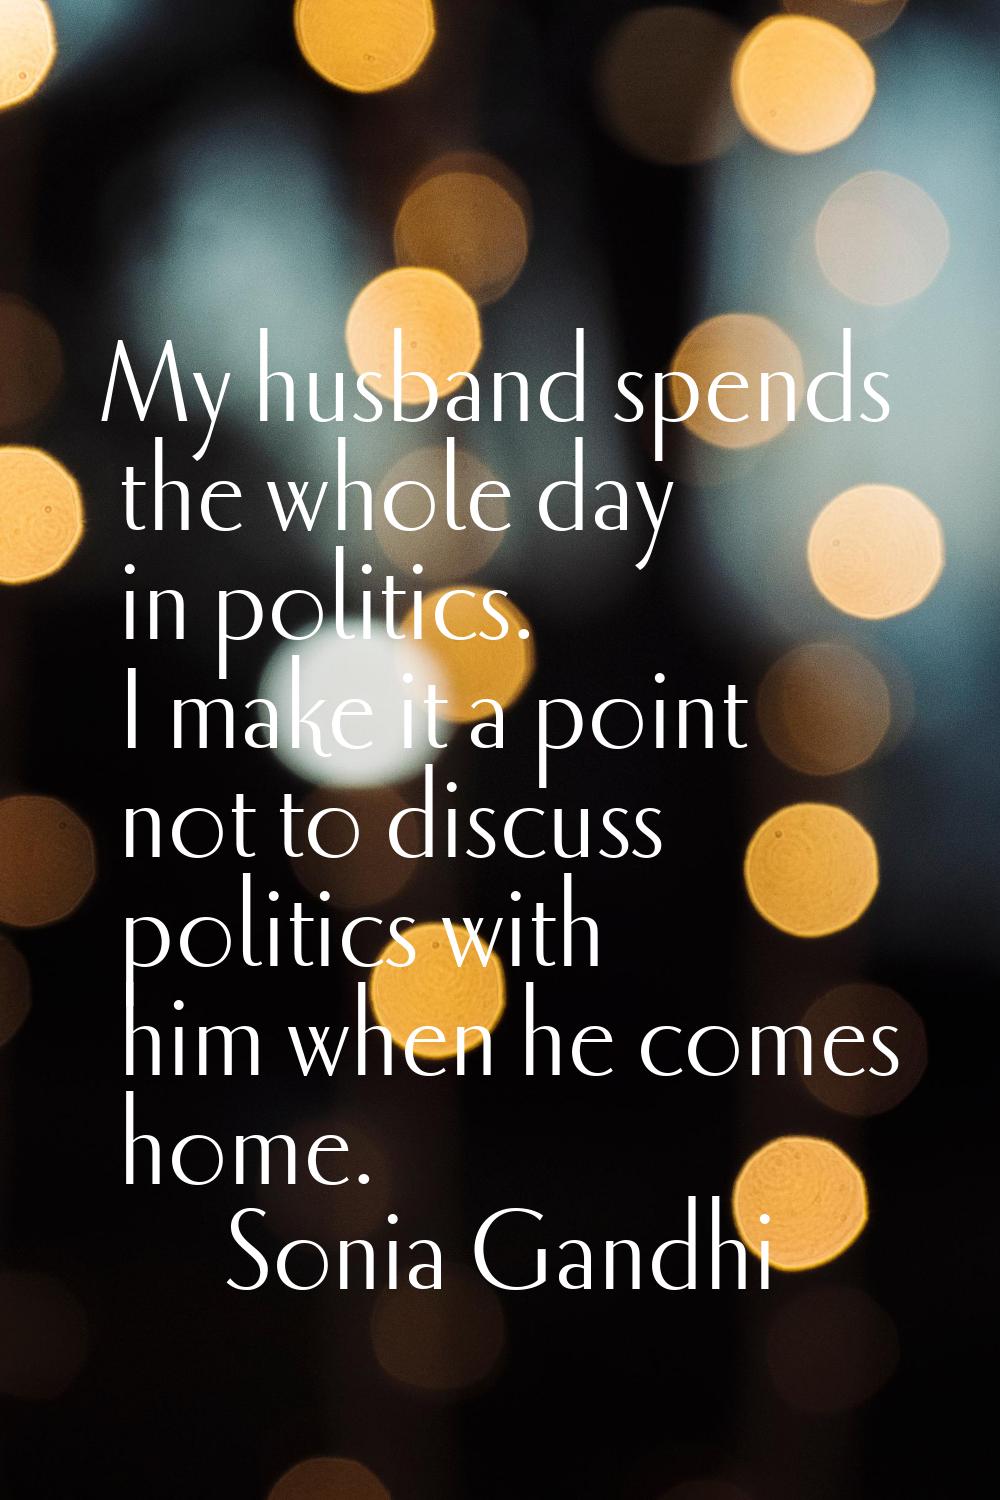 My husband spends the whole day in politics. I make it a point not to discuss politics with him whe